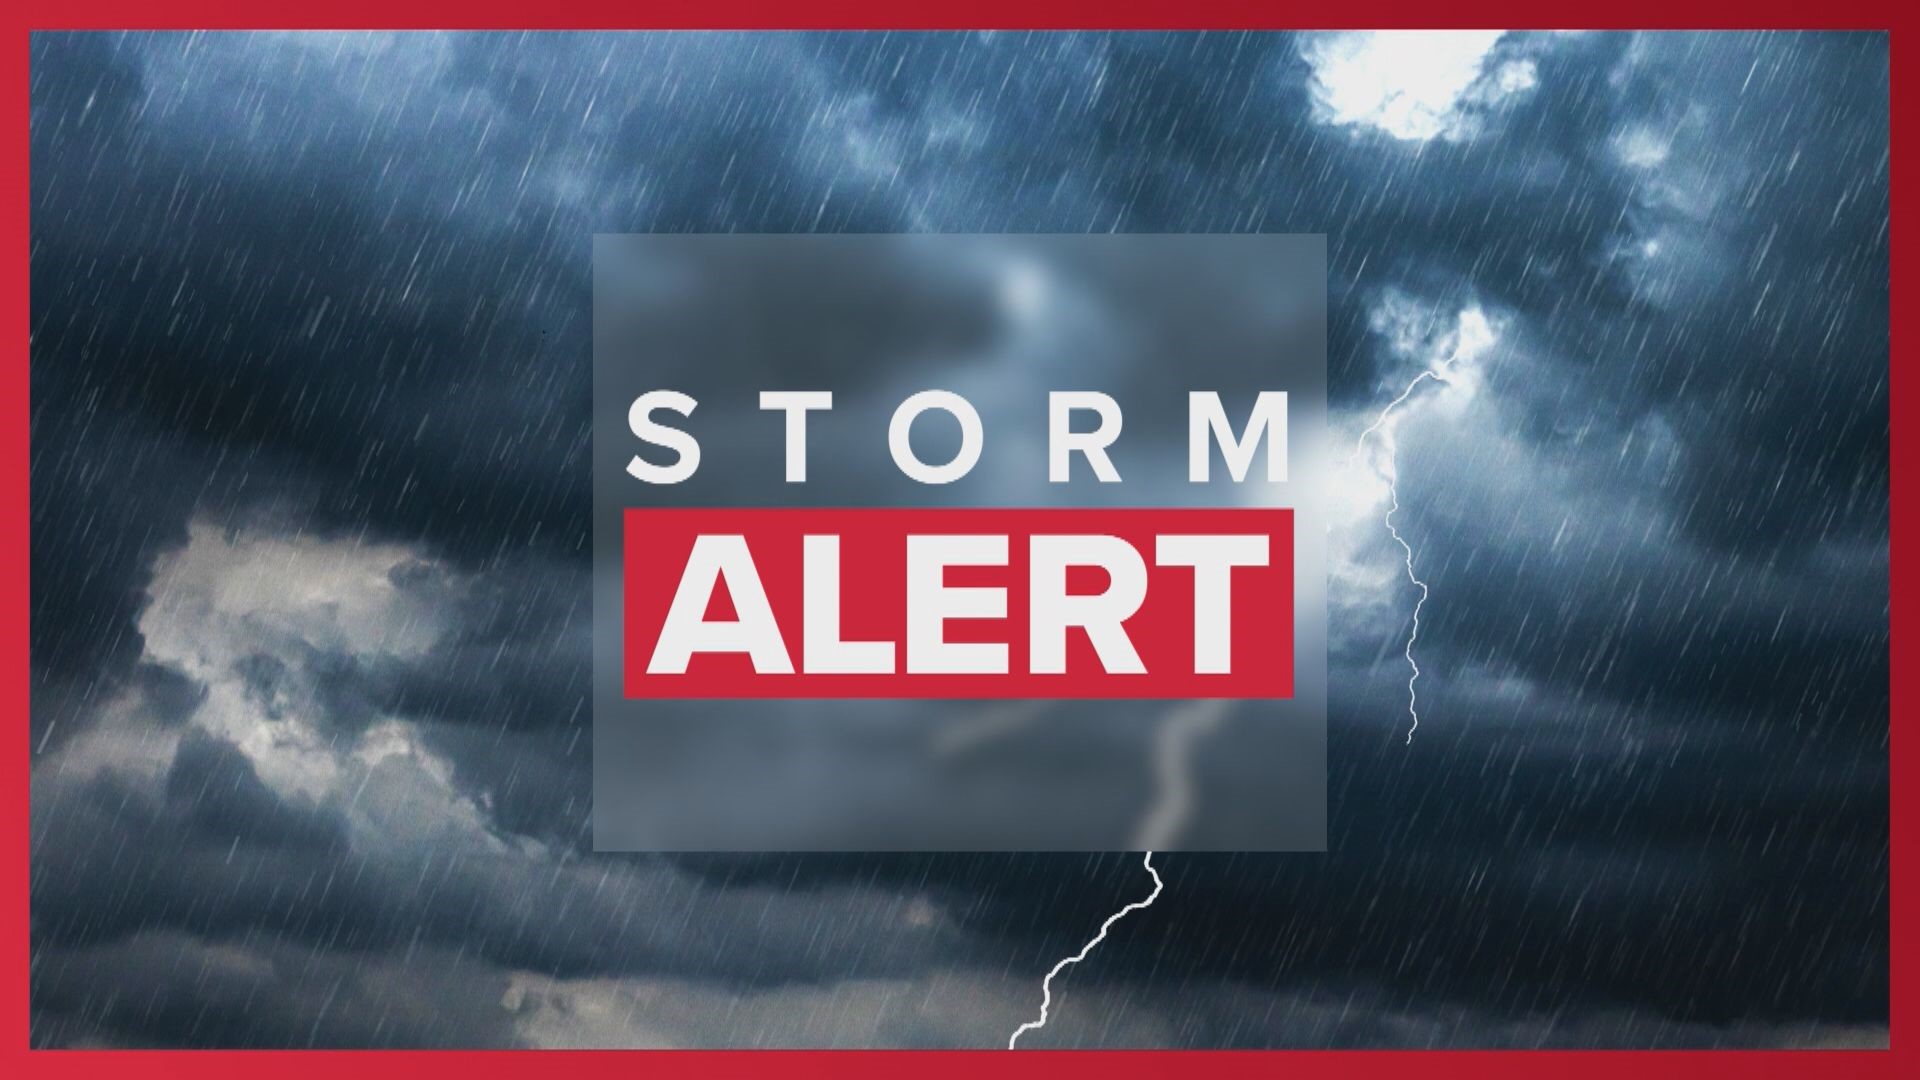 A severe thunderstorm warning was issued for parts Gasconade, Lincoln and Warren as the threat of severe weather approaches the St. Louis area.